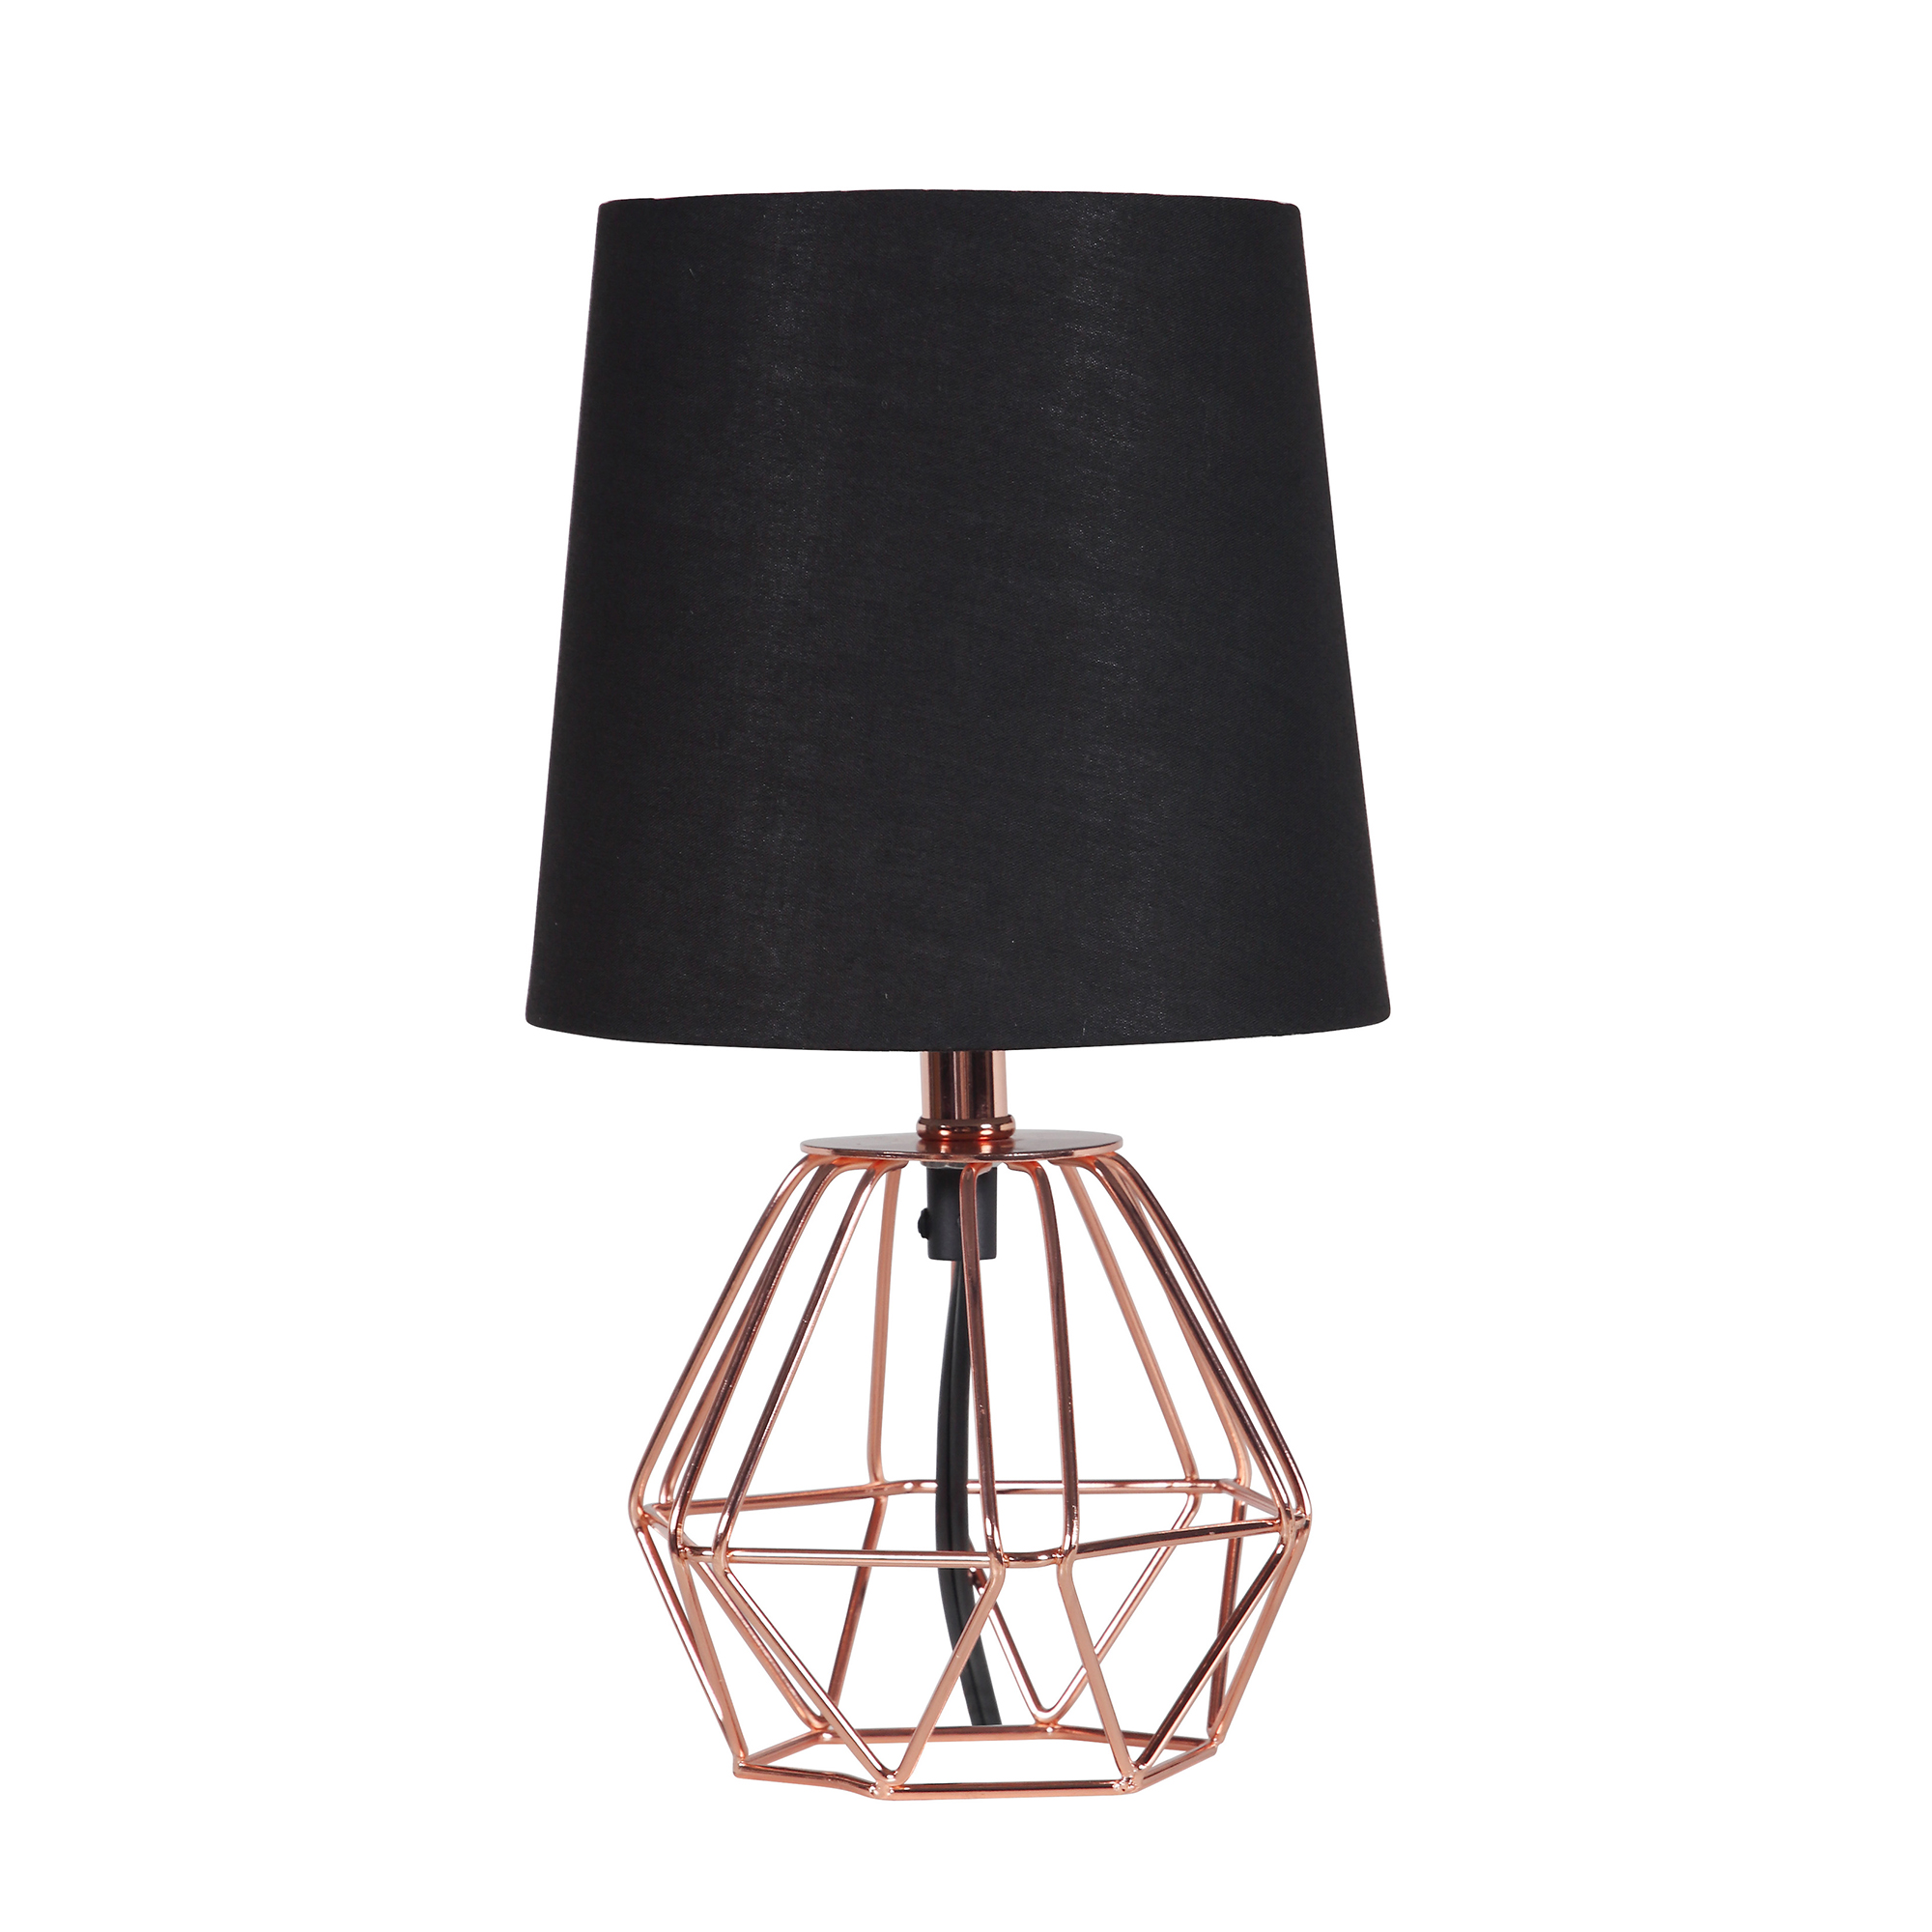 In Wesley Geometric Copper Metal Wire, Wire Base Copper Table Lamps